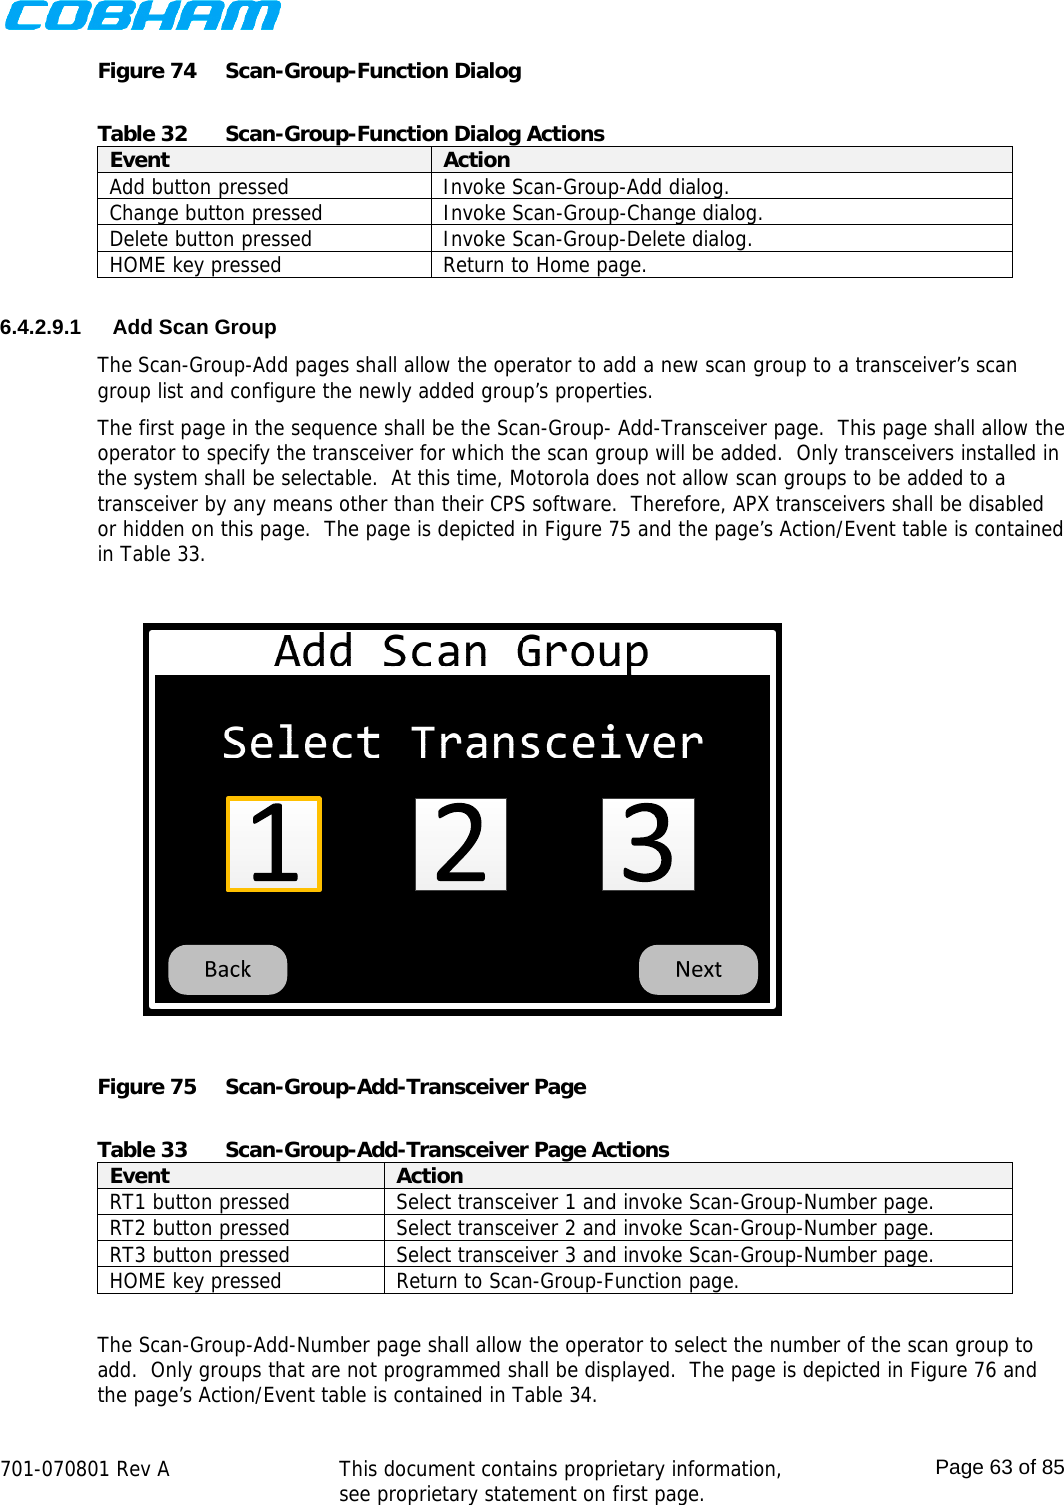    701-070801 Rev A   This document contains proprietary information, see proprietary statement on first page.  Page 63 of 85  Figure 74  Scan-Group-Function Dialog  Table 32  Scan-Group-Function Dialog Actions Event  Action Add button pressed  Invoke Scan-Group-Add dialog. Change button pressed  Invoke Scan-Group-Change dialog. Delete button pressed  Invoke Scan-Group-Delete dialog. HOME key pressed  Return to Home page.  6.4.2.9.1  Add Scan Group The Scan-Group-Add pages shall allow the operator to add a new scan group to a transceiver’s scan group list and configure the newly added group’s properties.  The first page in the sequence shall be the Scan-Group- Add-Transceiver page.  This page shall allow the operator to specify the transceiver for which the scan group will be added.  Only transceivers installed in the system shall be selectable.  At this time, Motorola does not allow scan groups to be added to a transceiver by any means other than their CPS software.  Therefore, APX transceivers shall be disabled or hidden on this page.  The page is depicted in Figure 75 and the page’s Action/Event table is contained in Table 33.  Figure 75  Scan-Group-Add-Transceiver Page  Table 33  Scan-Group-Add-Transceiver Page Actions Event  Action RT1 button pressed  Select transceiver 1 and invoke Scan-Group-Number page. RT2 button pressed  Select transceiver 2 and invoke Scan-Group-Number page. RT3 button pressed  Select transceiver 3 and invoke Scan-Group-Number page. HOME key pressed  Return to Scan-Group-Function page.  The Scan-Group-Add-Number page shall allow the operator to select the number of the scan group to add.  Only groups that are not programmed shall be displayed.  The page is depicted in Figure 76 and the page’s Action/Event table is contained in Table 34. 